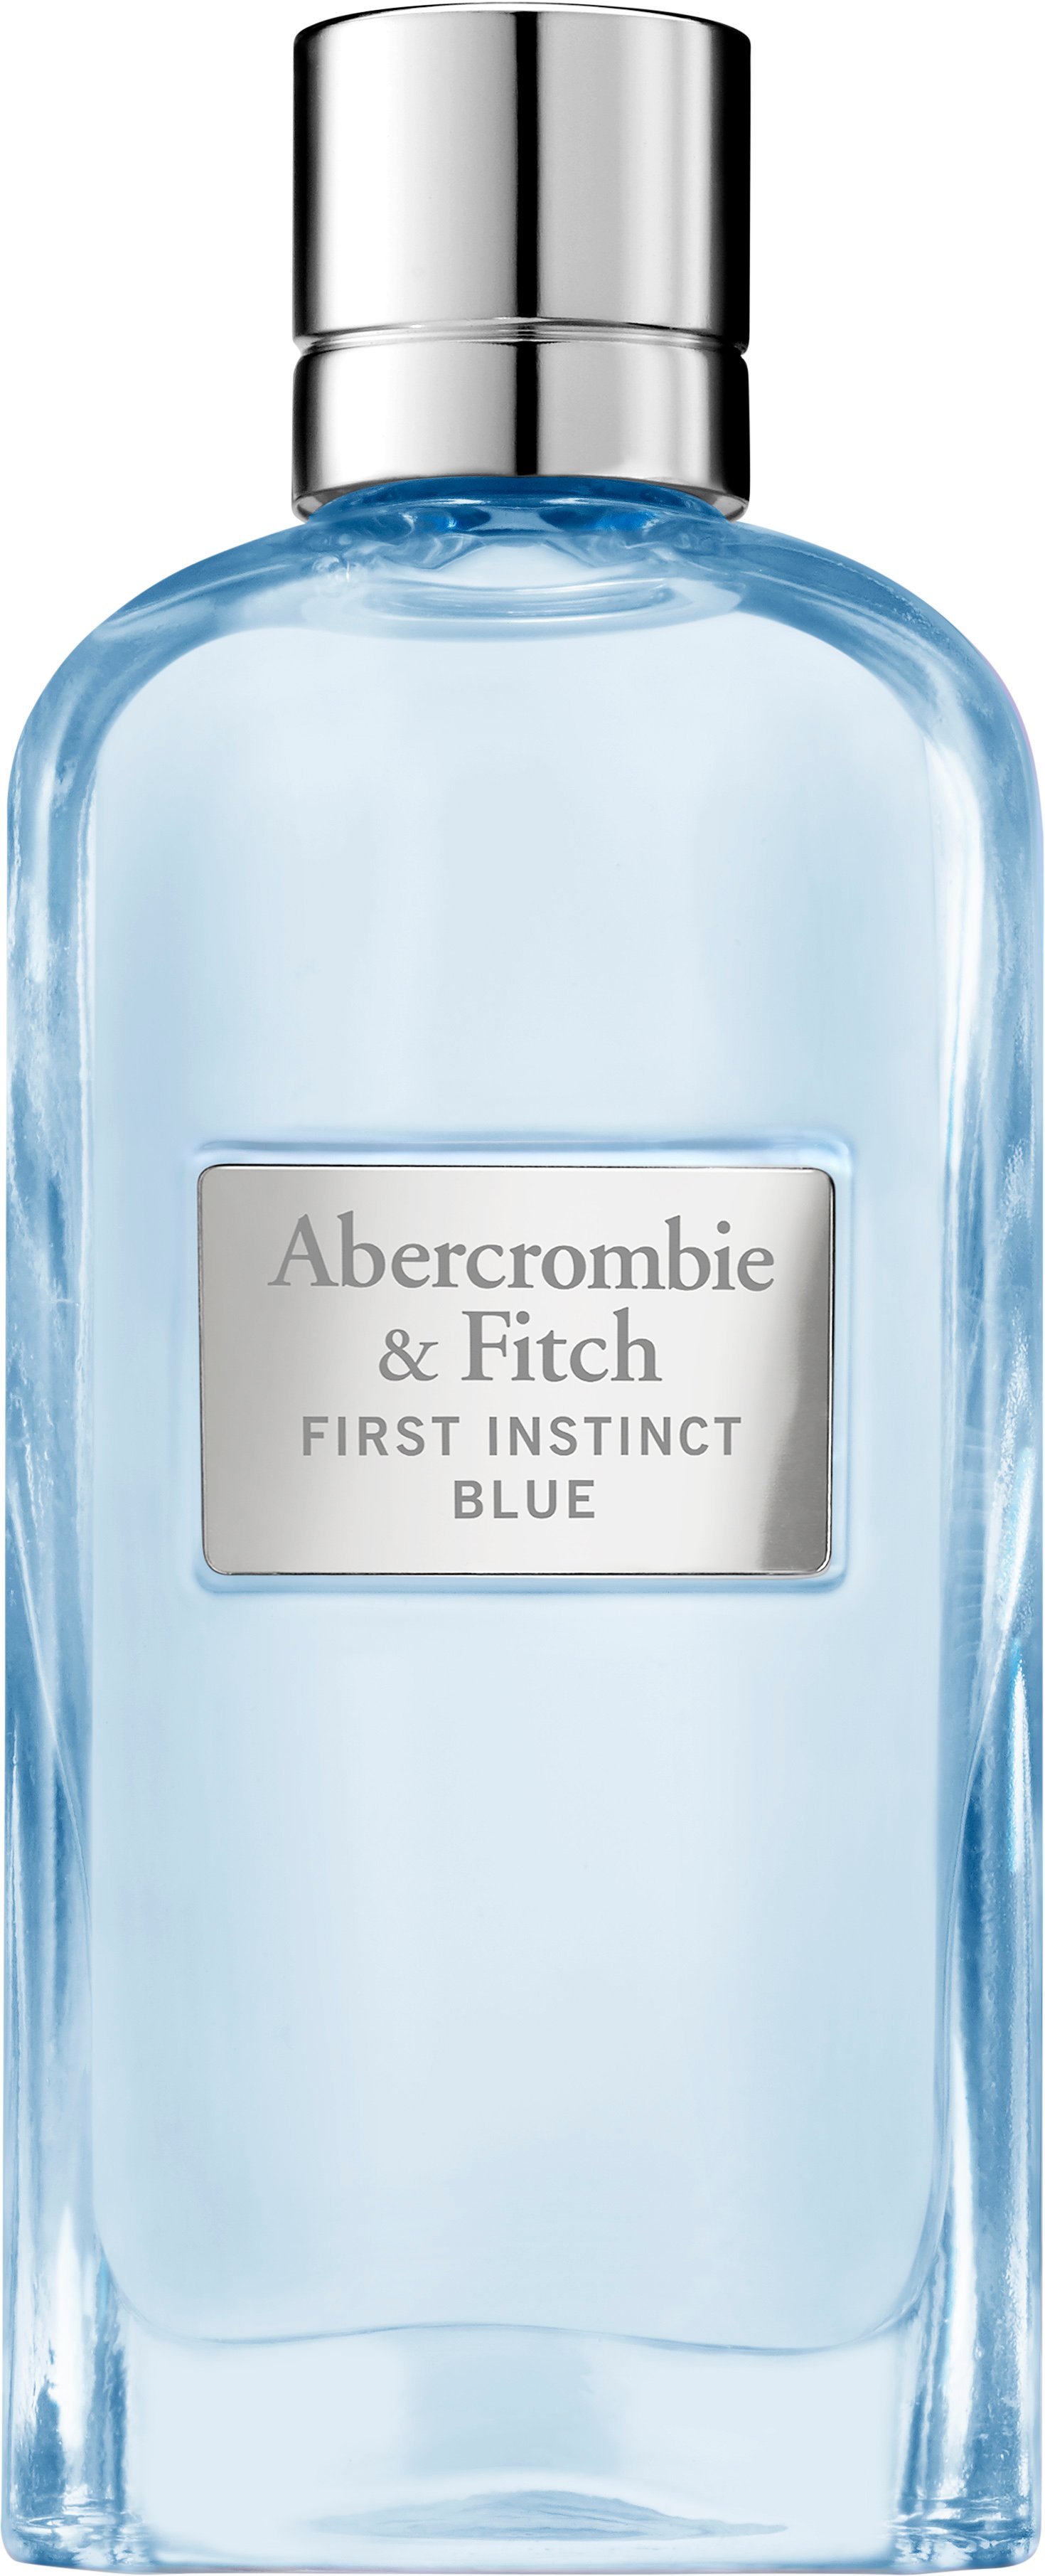 Abercrombie&Fitch - First Instinct Blue for Her EDP 100 ml